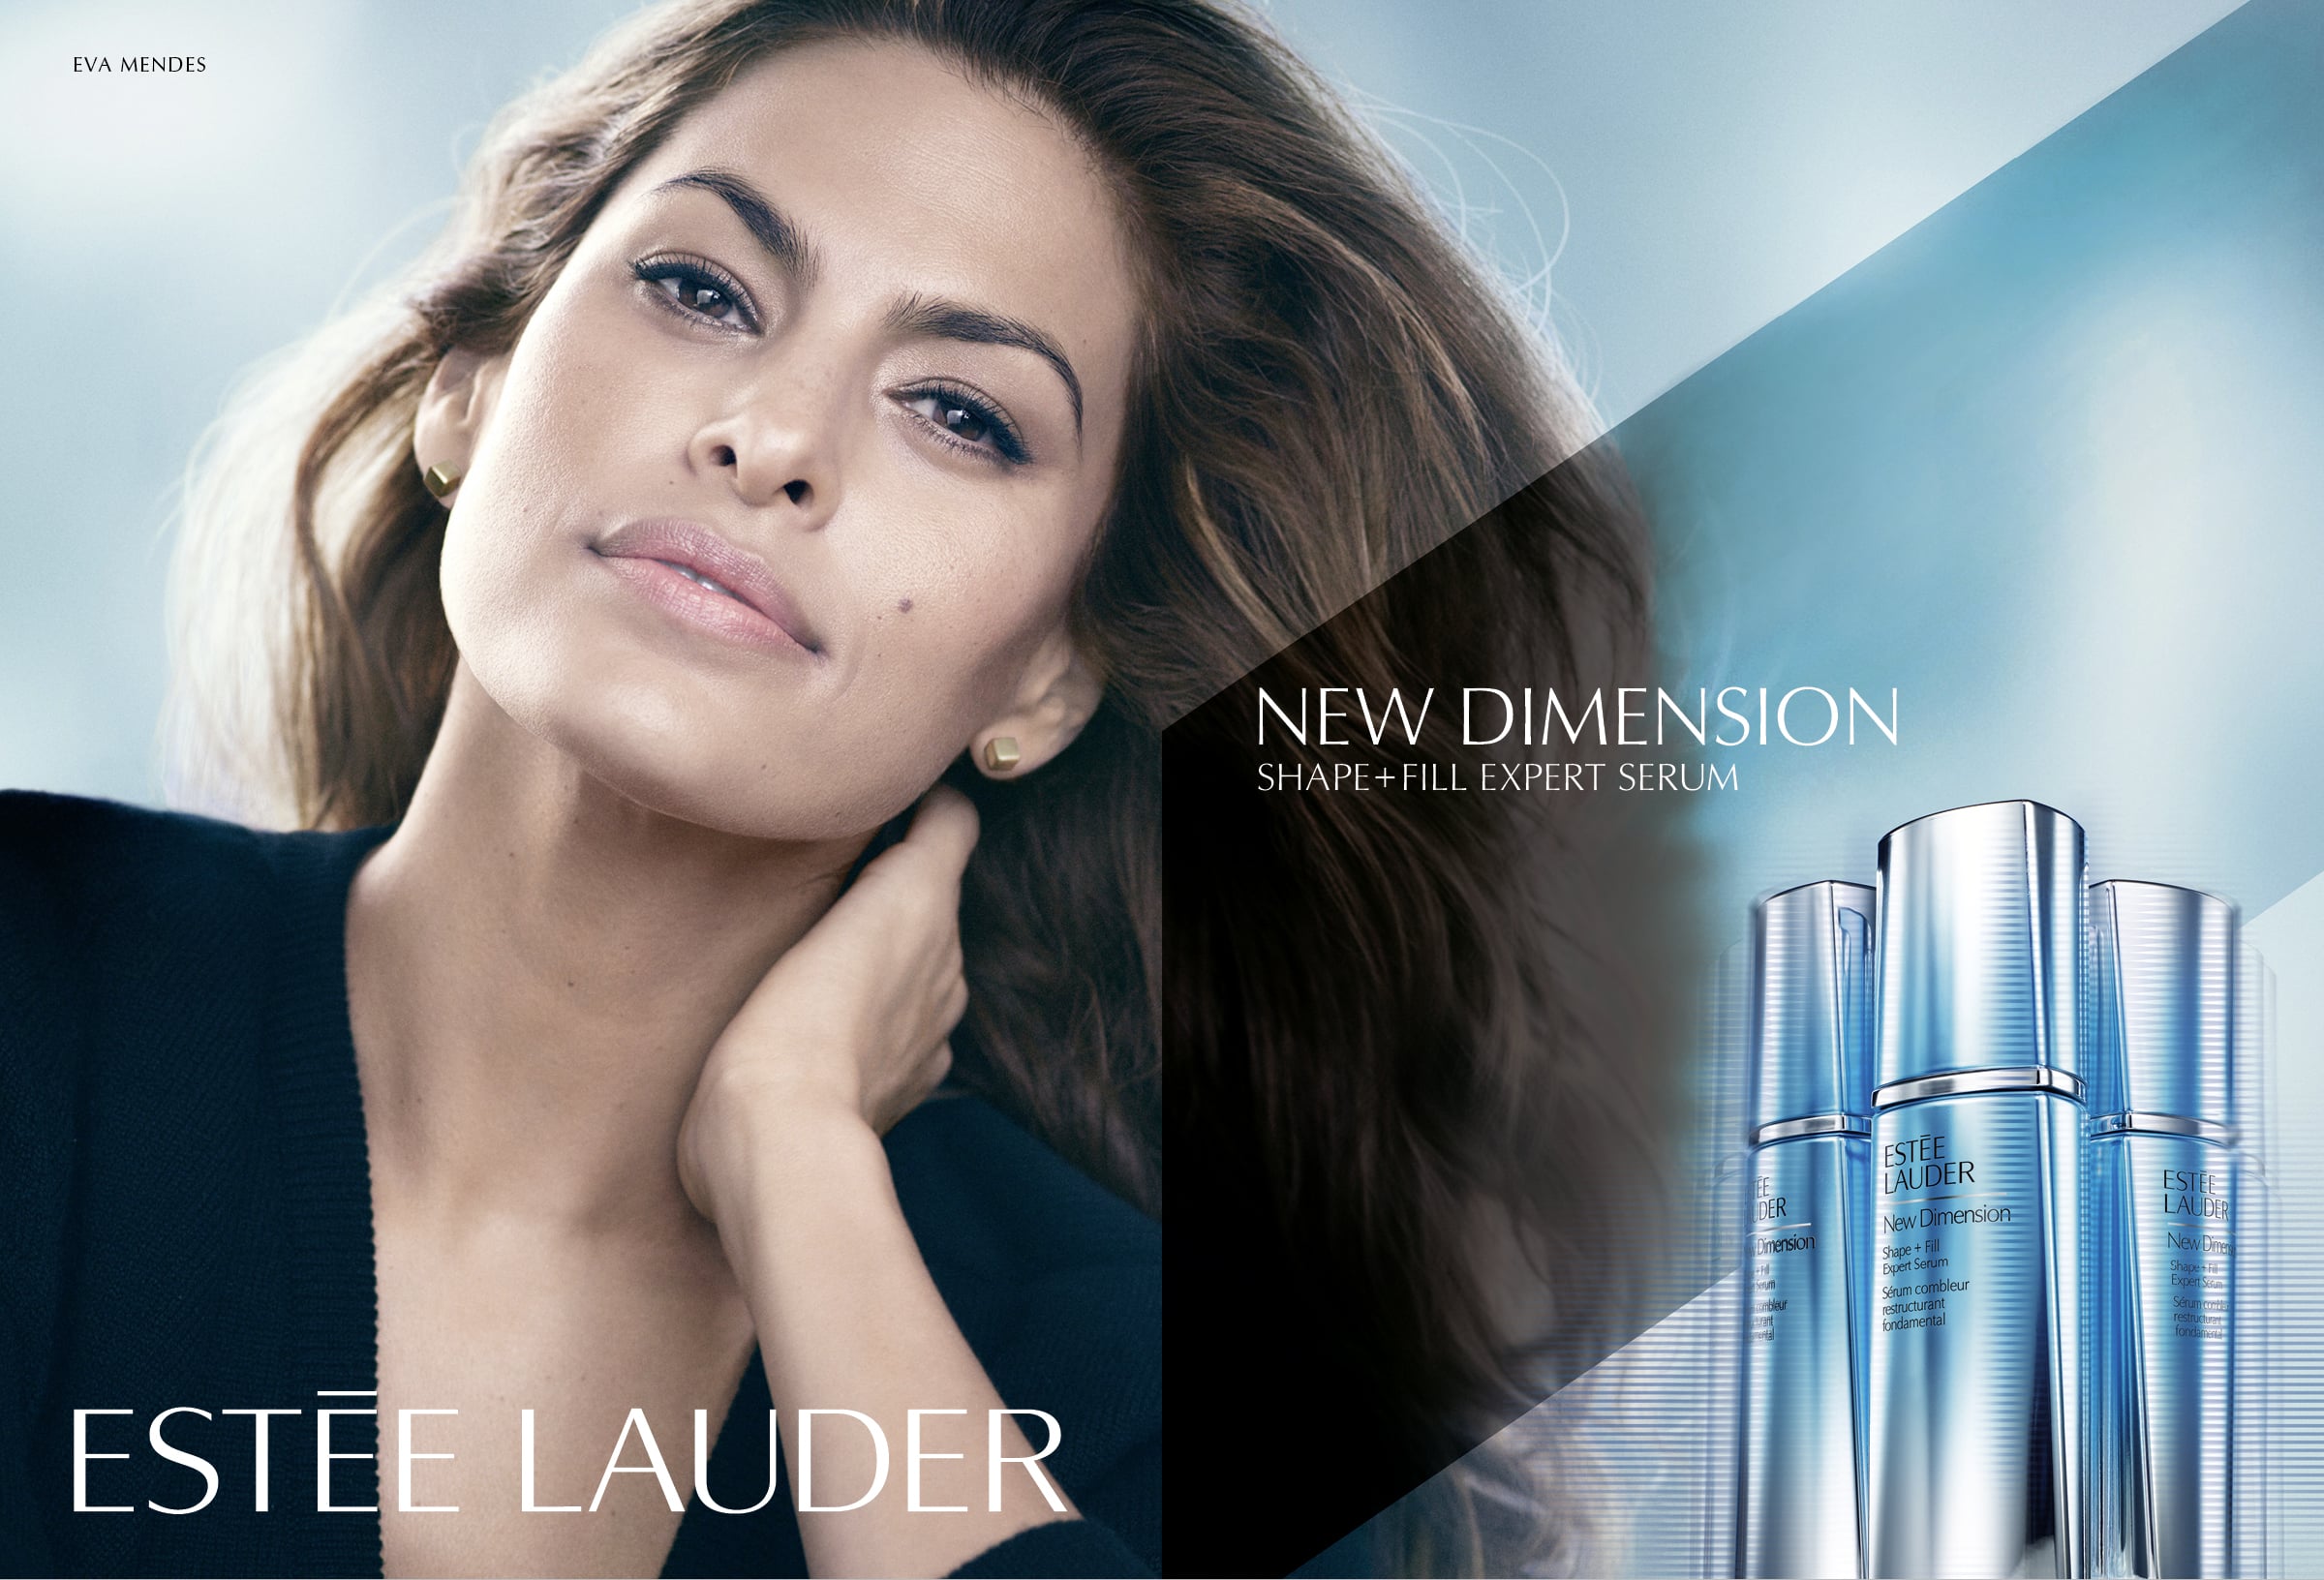 Eva Mendes Is the New Face of Estee Lauder